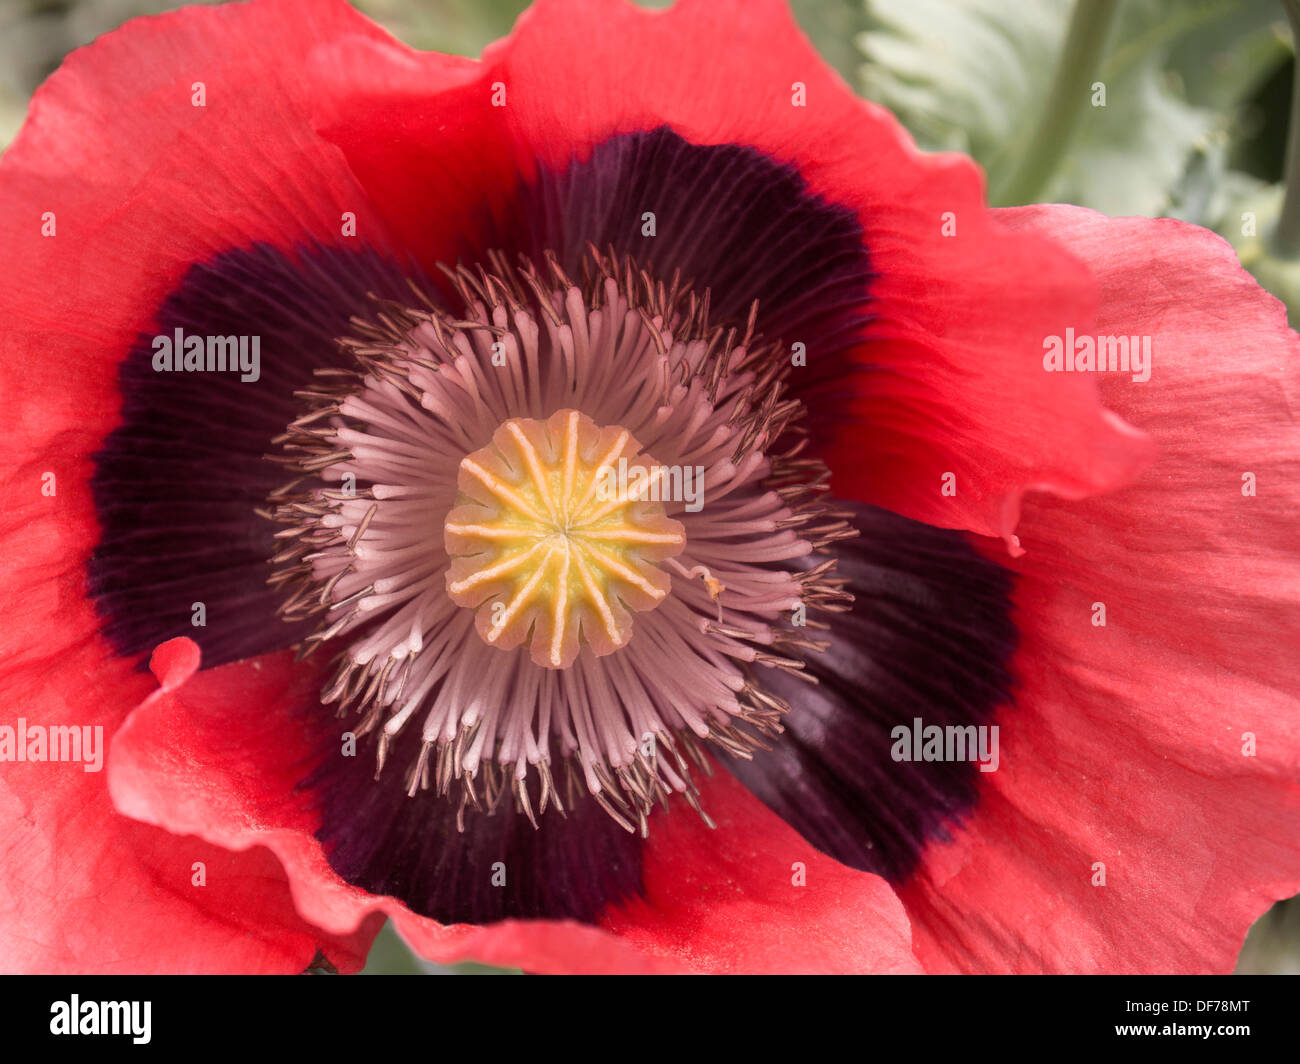 One pink, red and black oriental poppy ( papaver orientale ) flower head central detail showing petals, pistil and stamens. Stock Photo